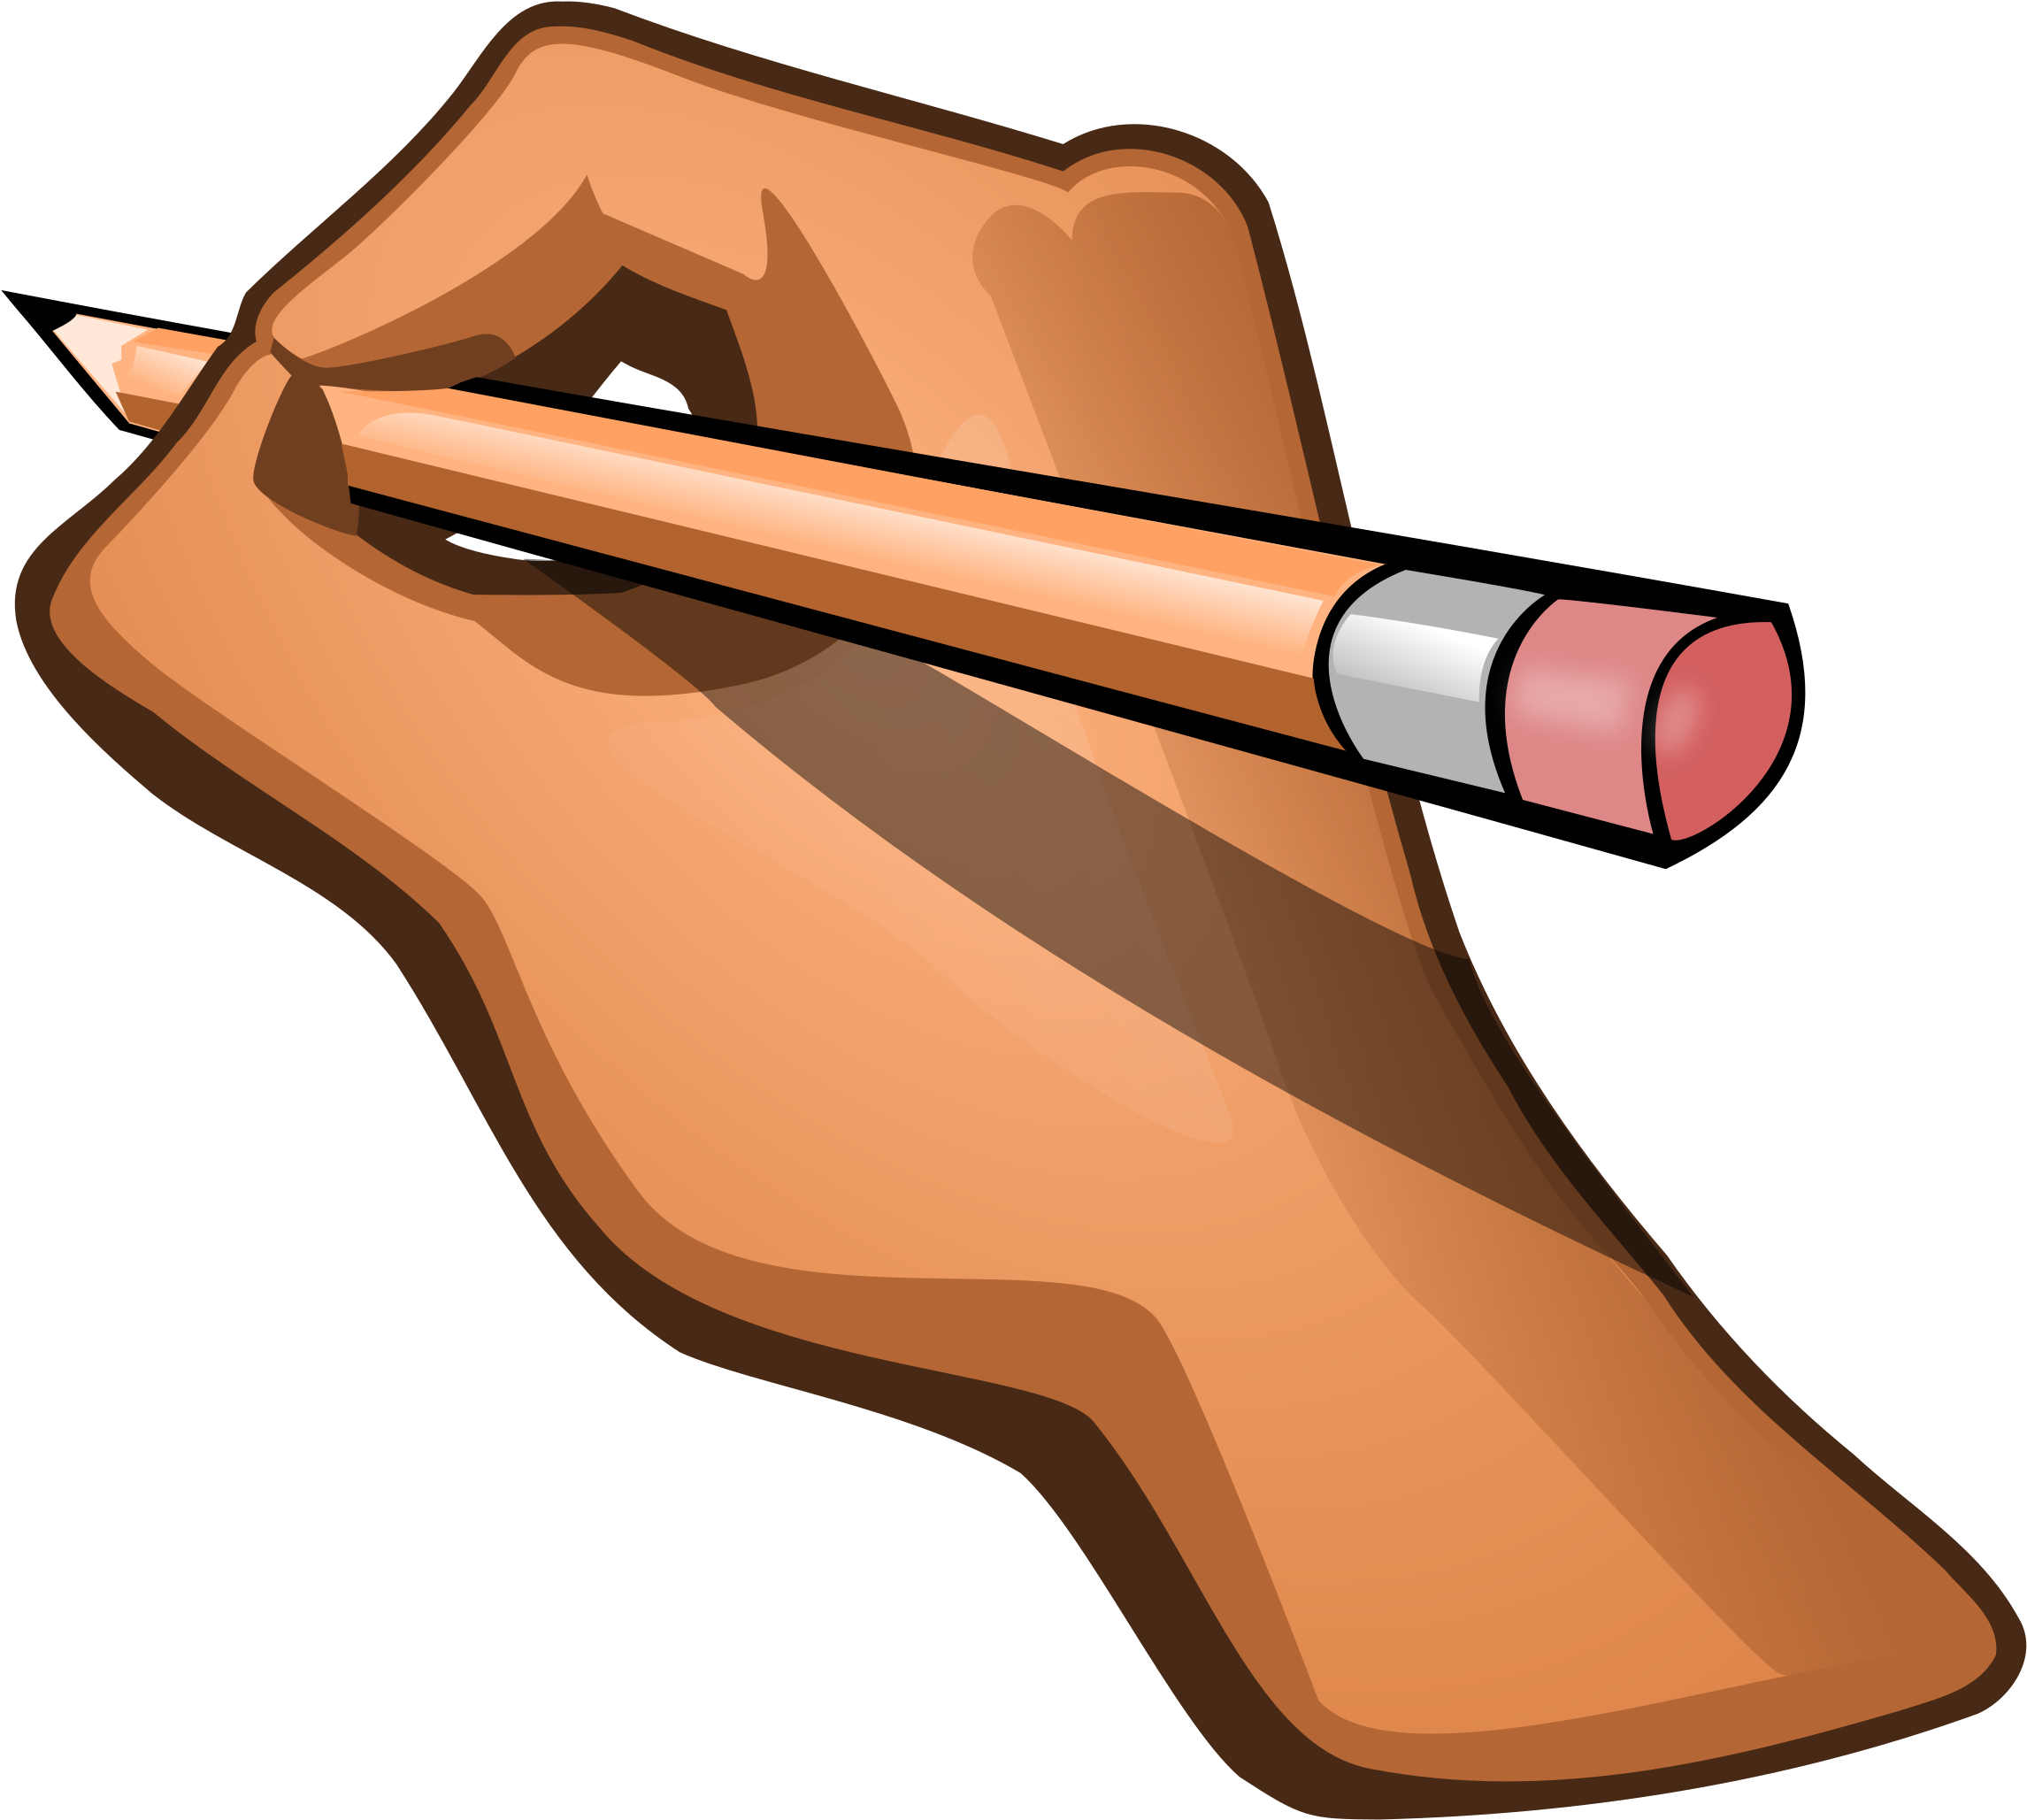 Free Hand Holding Pencil Png, Download Free Clip Art, Free